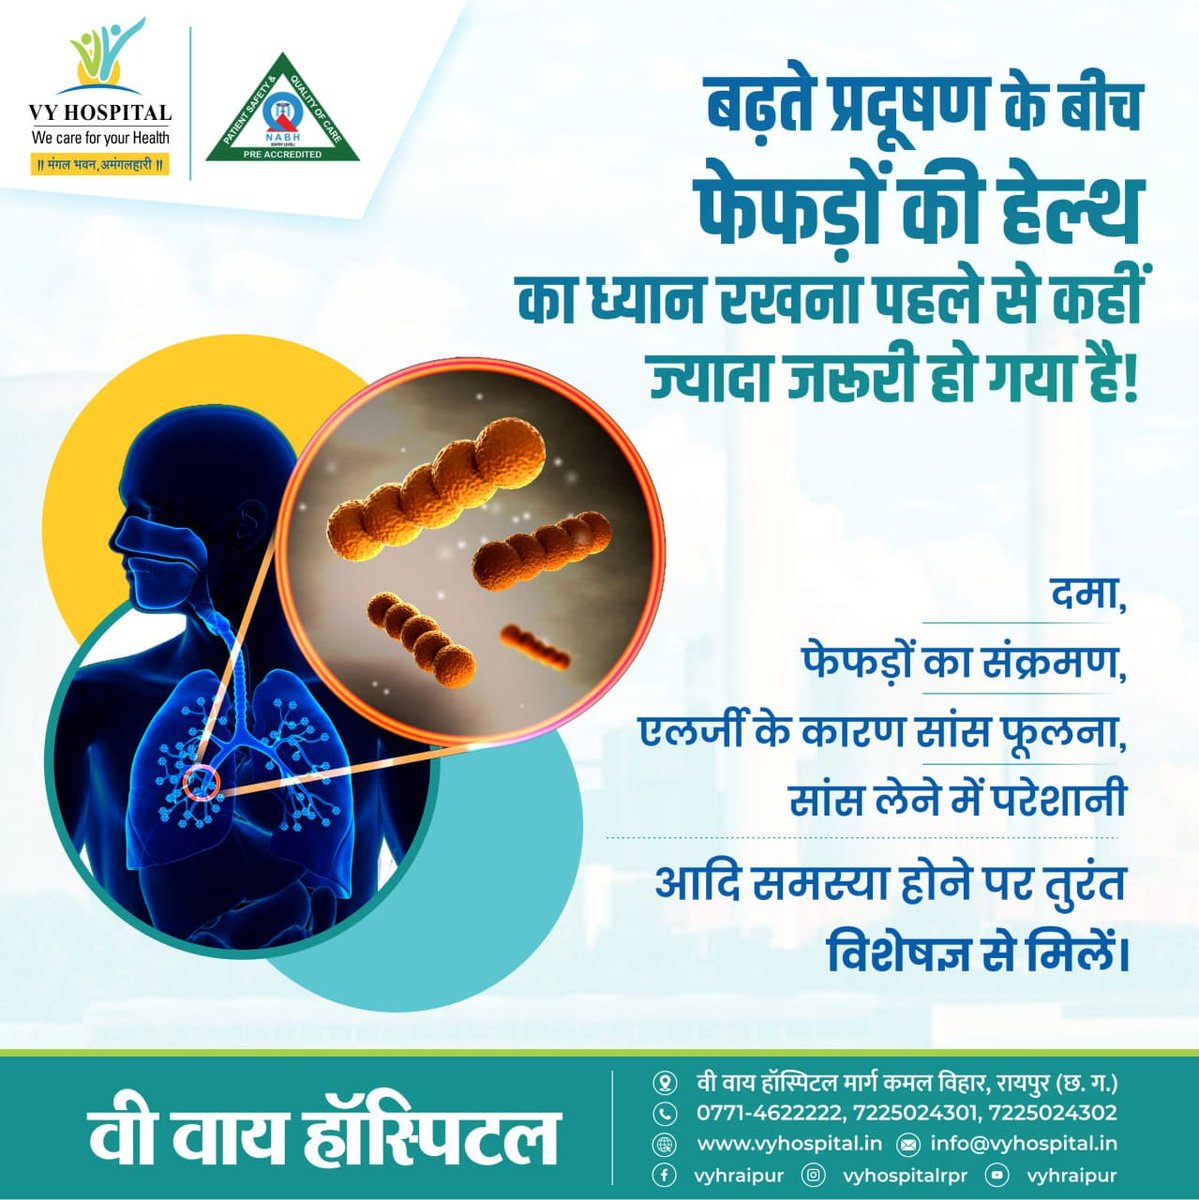 Pollution is increasing lung disease. Meet the chest specialist and get tested.

Call Us :- 0771 4622222 / 7225024301
#Pollution #PollutionEffects #Lungs #LungHealth #Pulmonary #Pulmonology #Pulmonologist #LungCare #VYHospital #Raipur #Chhattisgarh